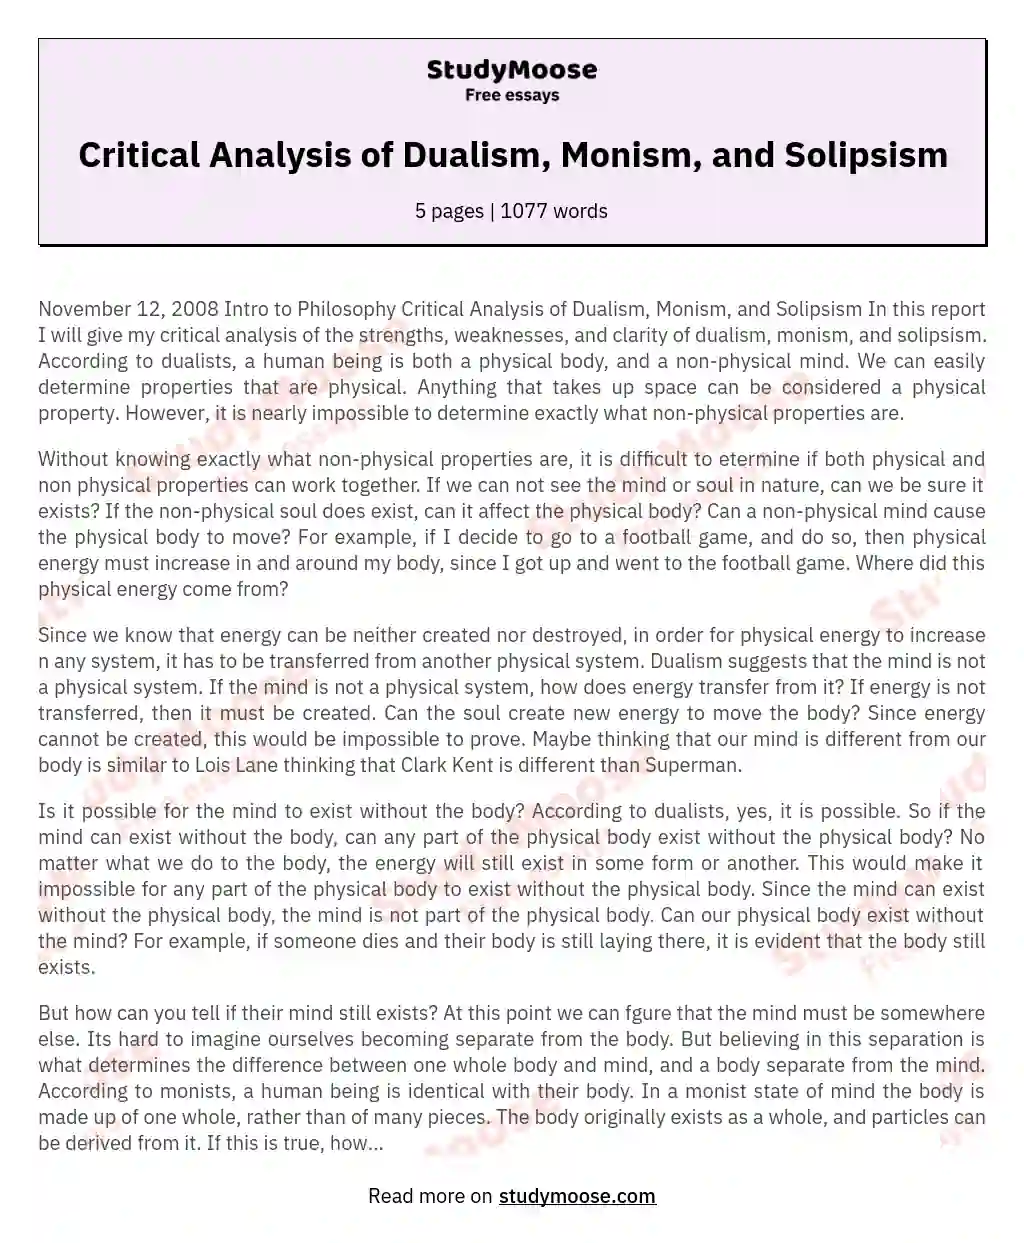 Critical Analysis of Dualism, Monism, and Solipsism essay